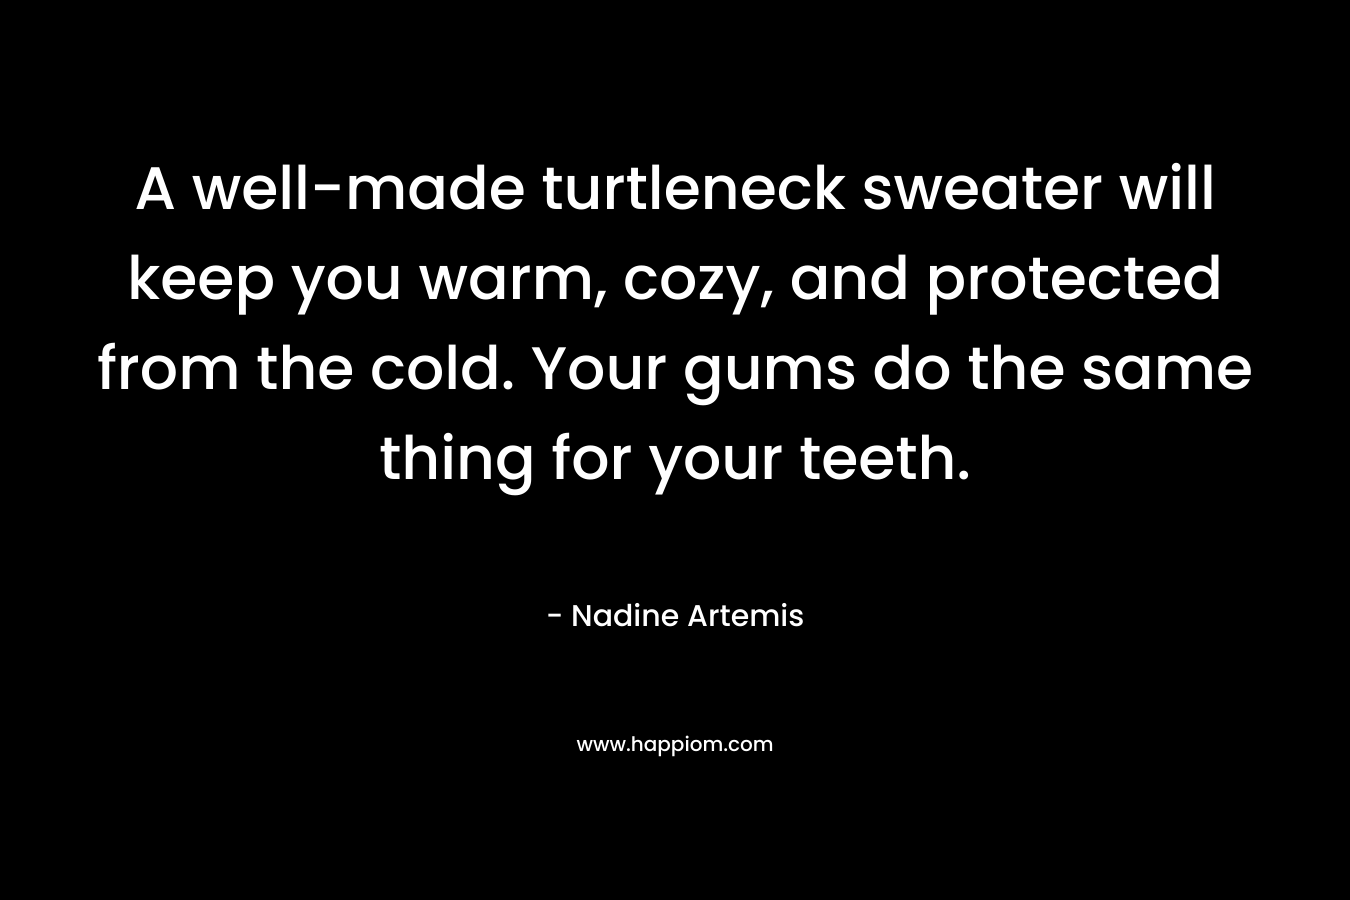 A well-made turtleneck sweater will keep you warm, cozy, and protected from the cold. Your gums do the same thing for your teeth.